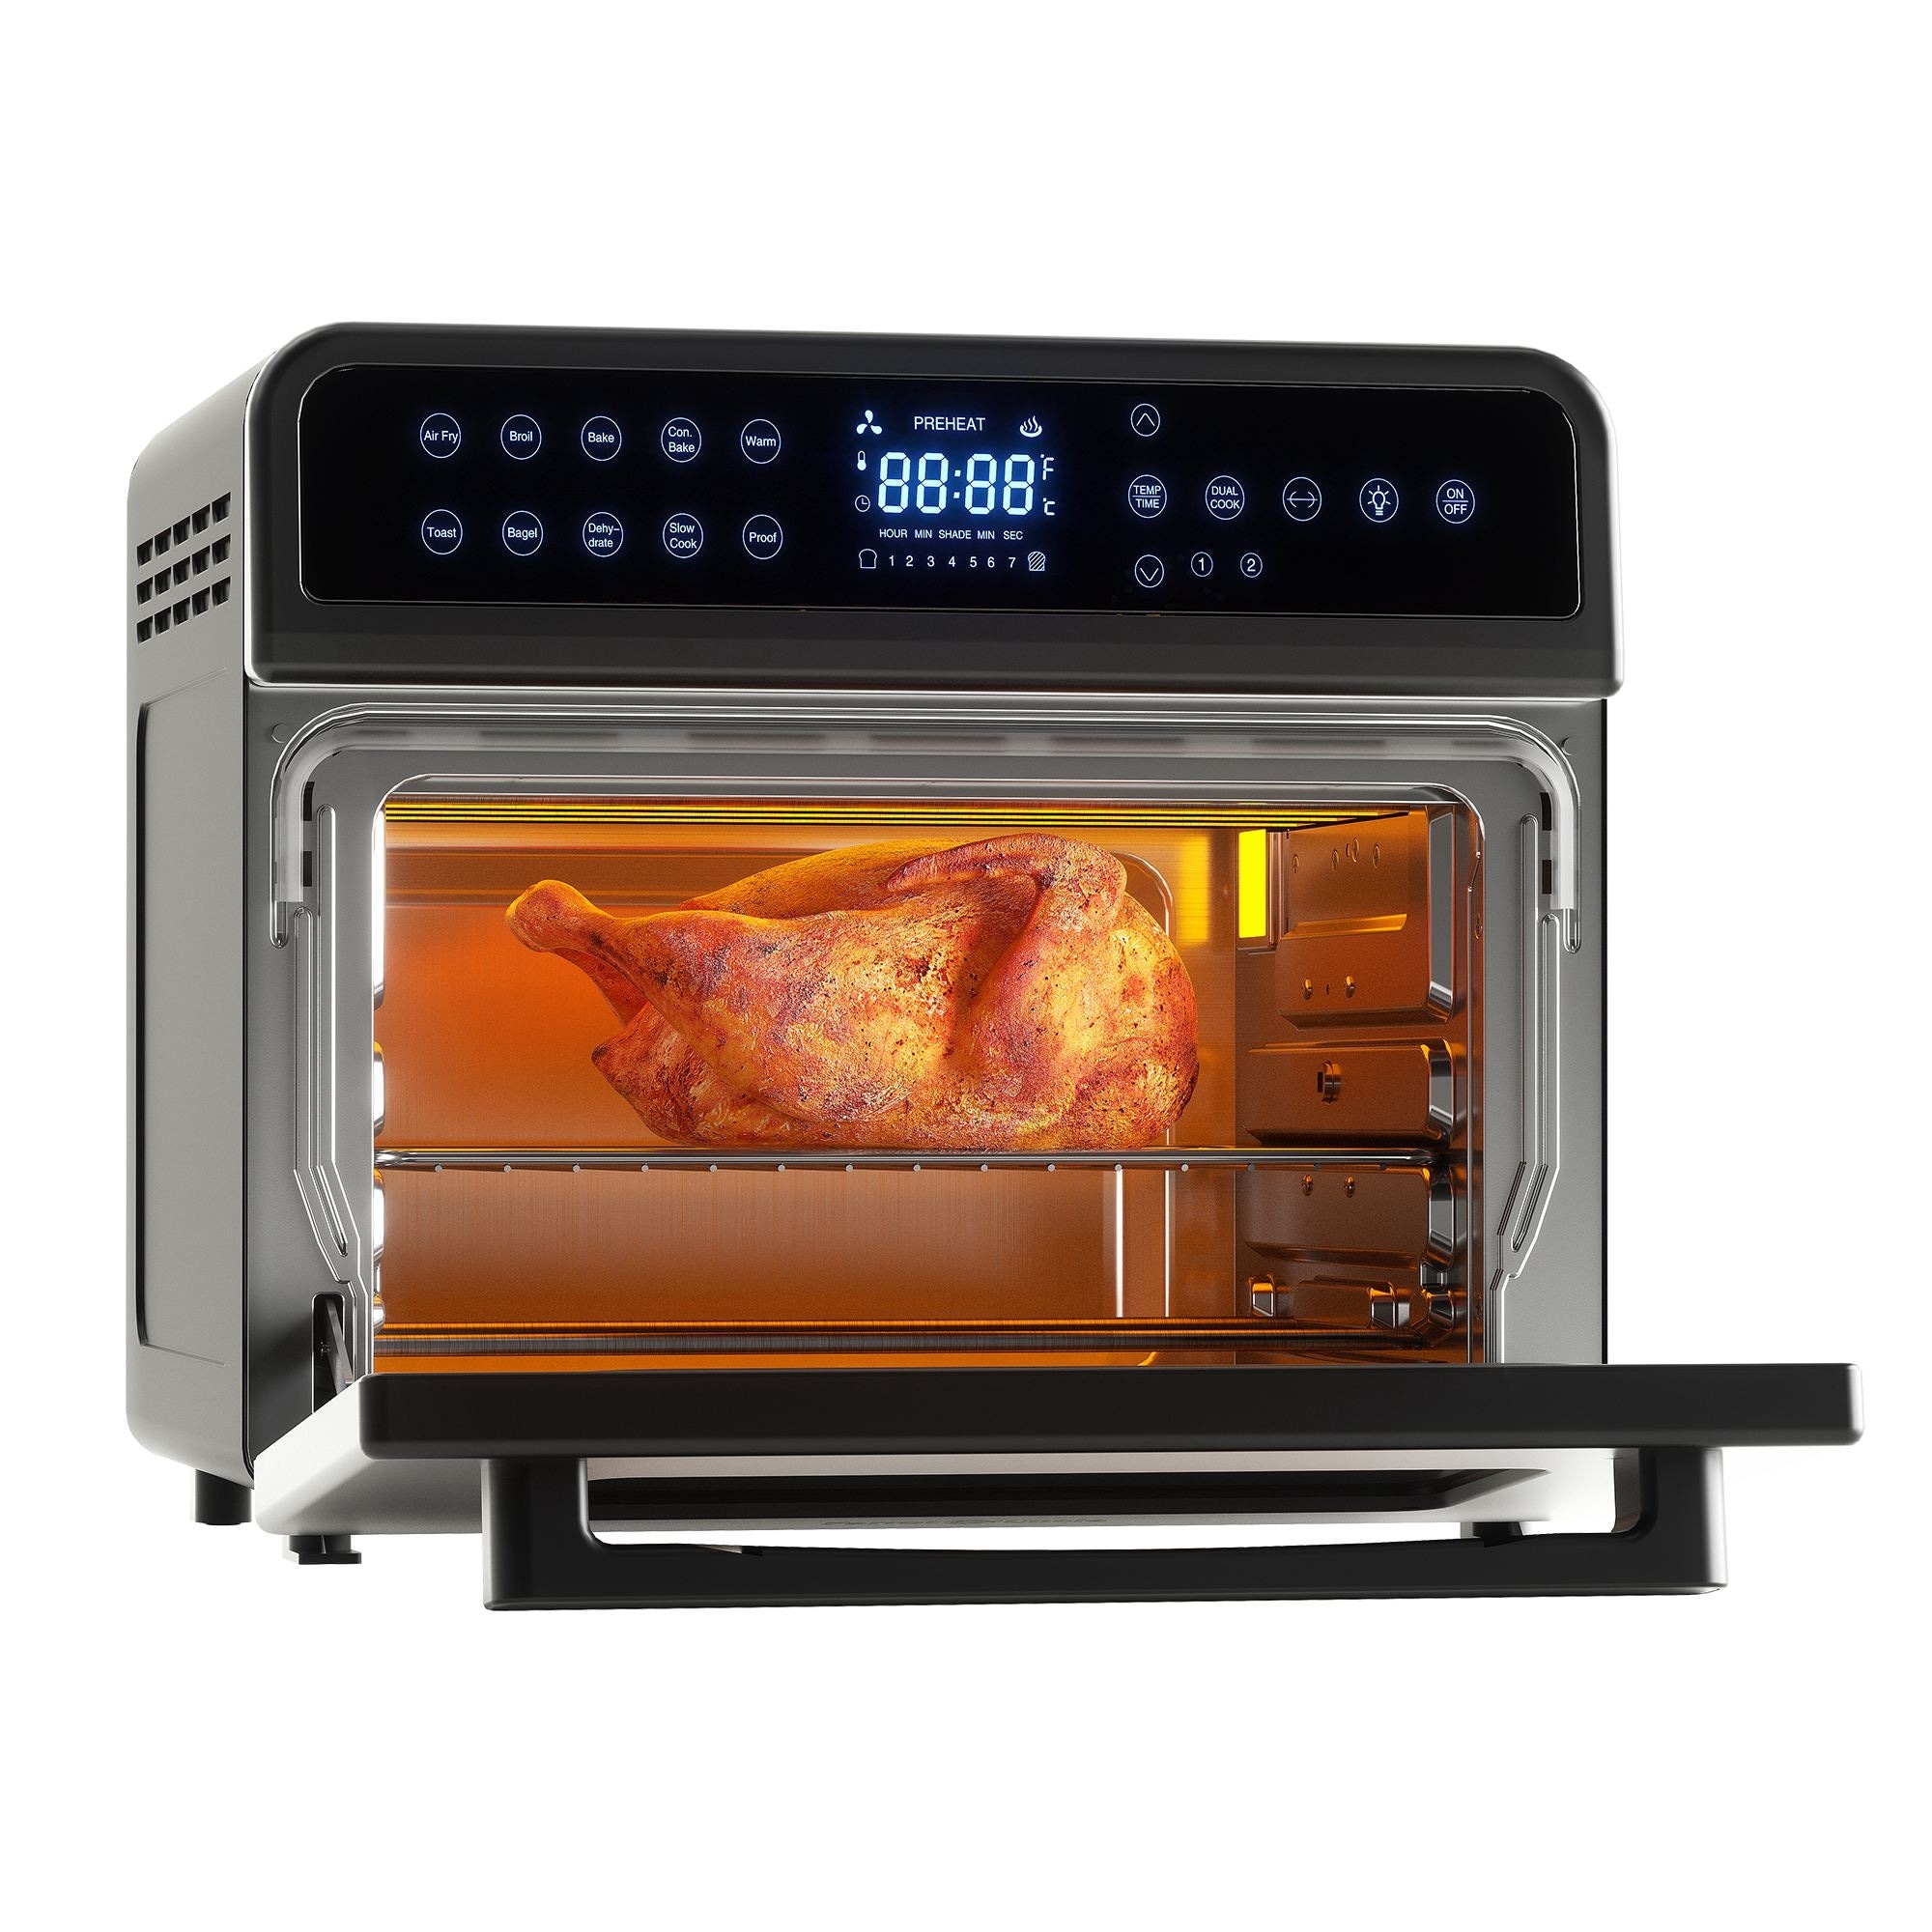 MOOSOO 12.6 Qt Air Fryer Toaster Oven With Rotisserie